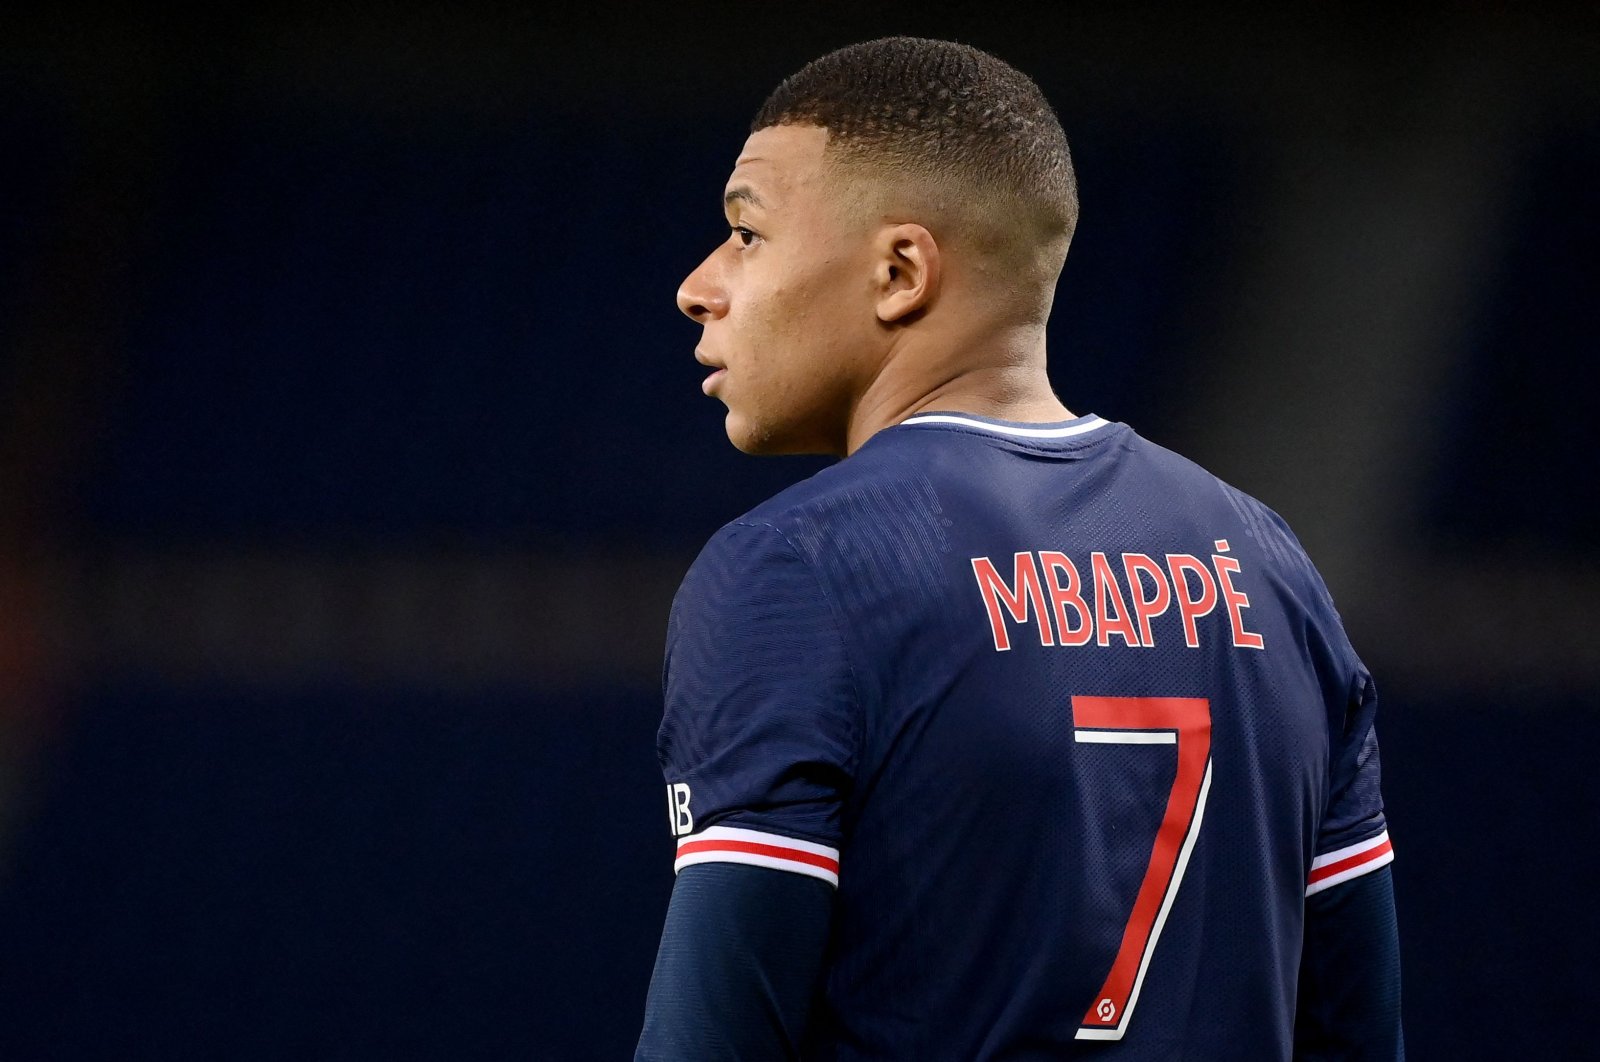 Paris Saint-Germain's French forward Kylian Mbappe looks on during the French L1 football match between PSG and Nantes at the Parc des Princes stadium in Paris, March 14, 2021. (AFP Photo)